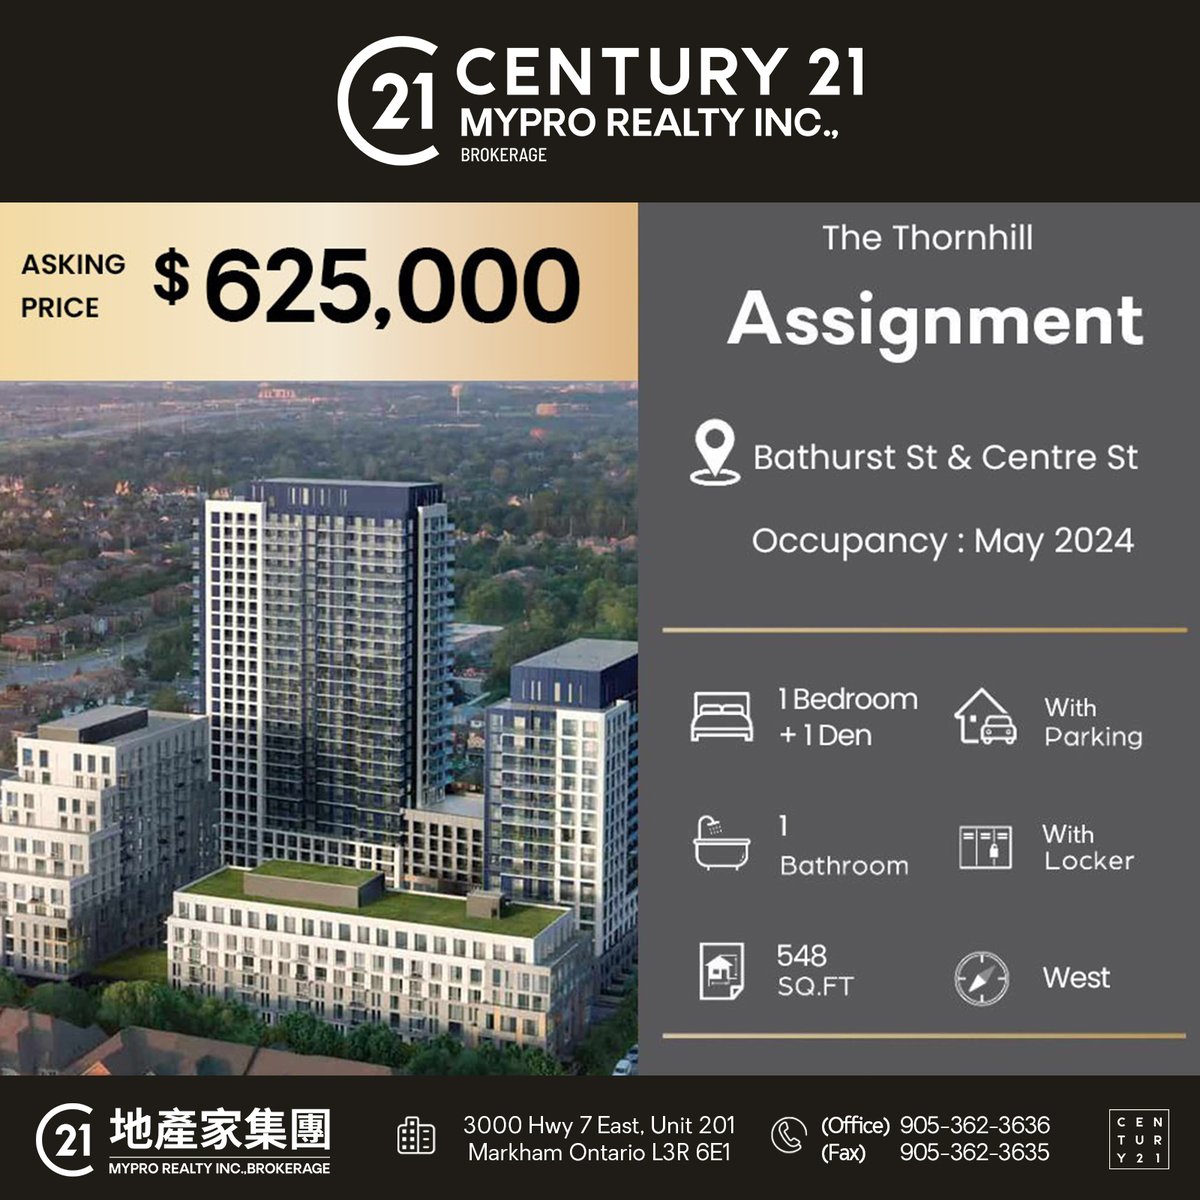 🌟 The Thornhill Assignment 🌟 💰Asking $625,000 📍Bathurst St & Centre St 🔑 1 Bed 1 Den 1 Bath 🗓️ Occupancy May, 2024 📐548 sq.ft 🤝Commission 2.5% #RealEstate #TorontoProperty #TorontoCondos #AssignmentSales #Century21 #HomeBuying #CondoSales #TorontoListings